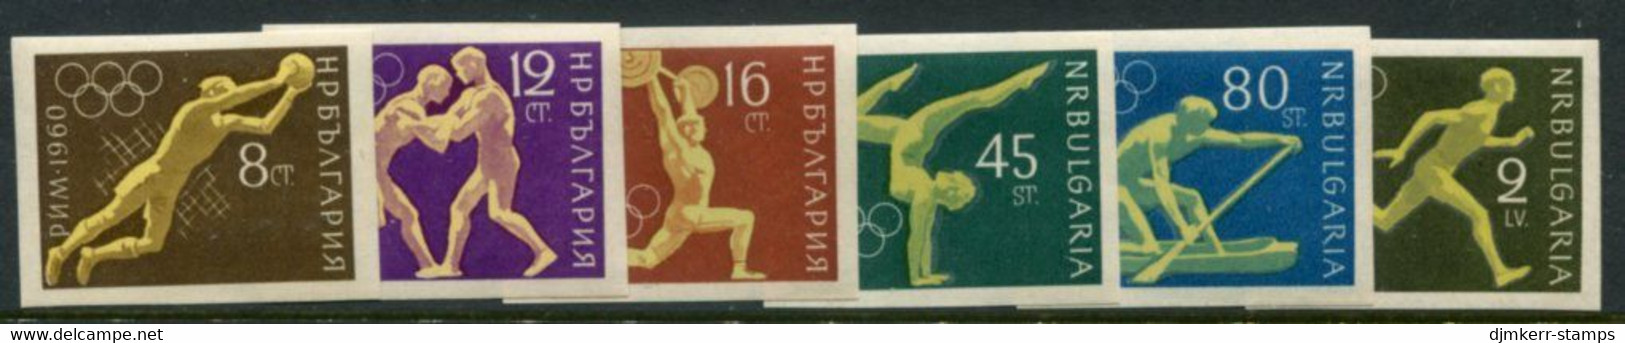 BULGARIA 1960 Olympic Games Imperforate MNH / **.  Michel 1178-83 - Neufs